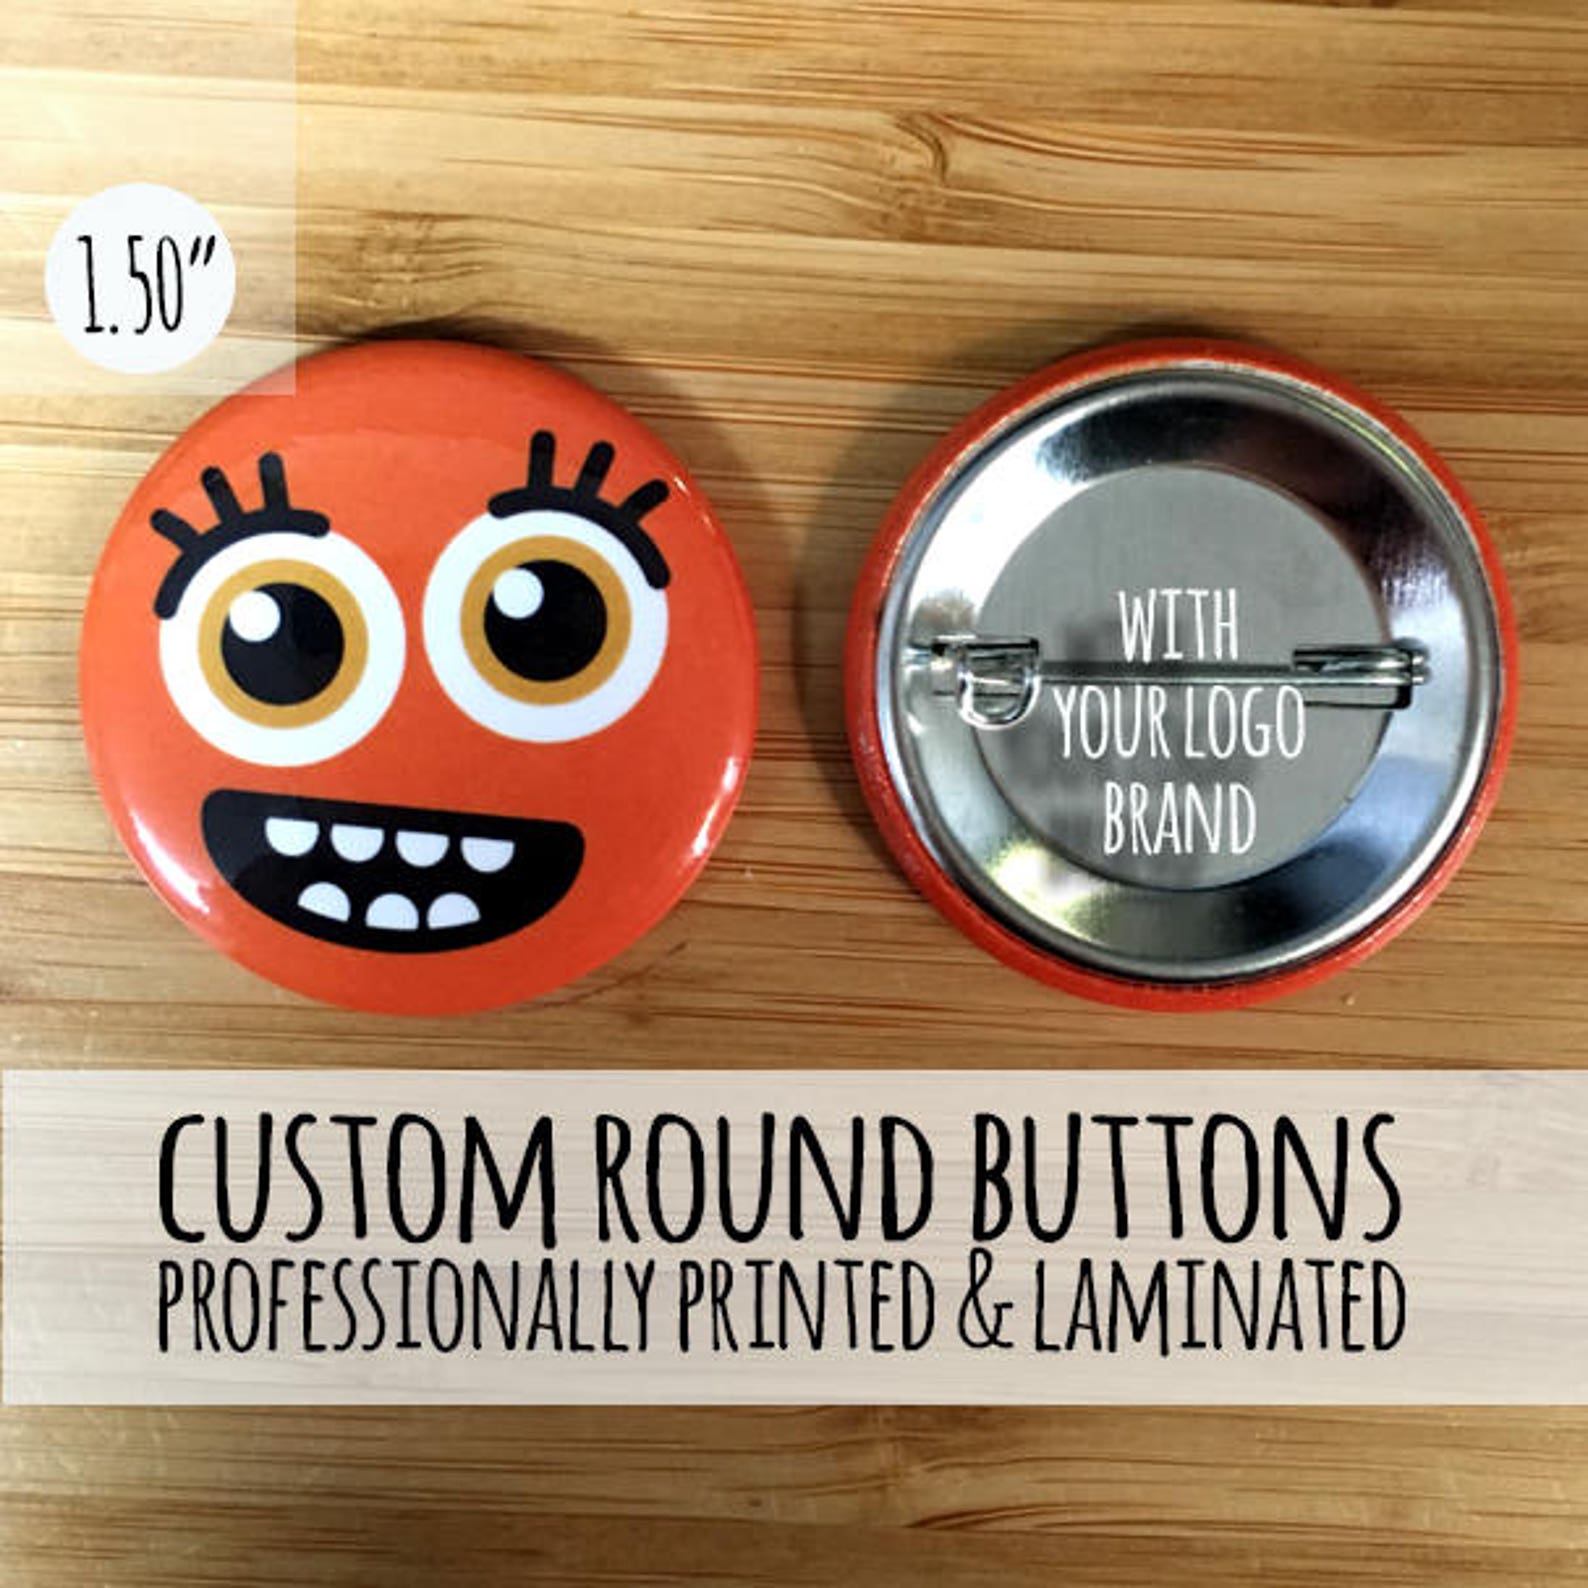 Customize button. Custom buttons images. Round Custom button for load file. Custom round